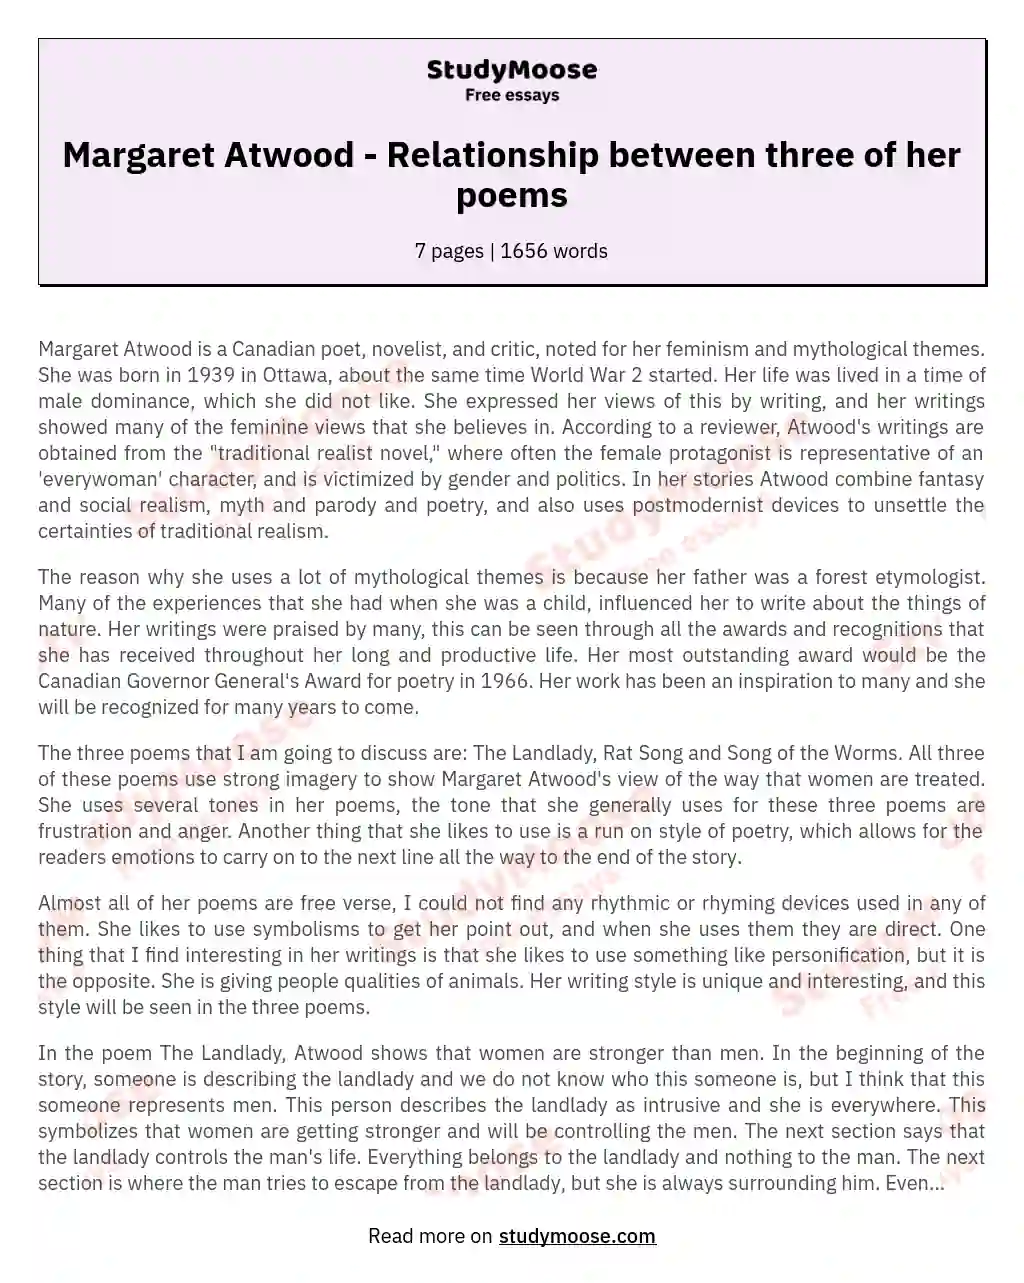 Margaret Atwood - Relationship between three of her poems essay